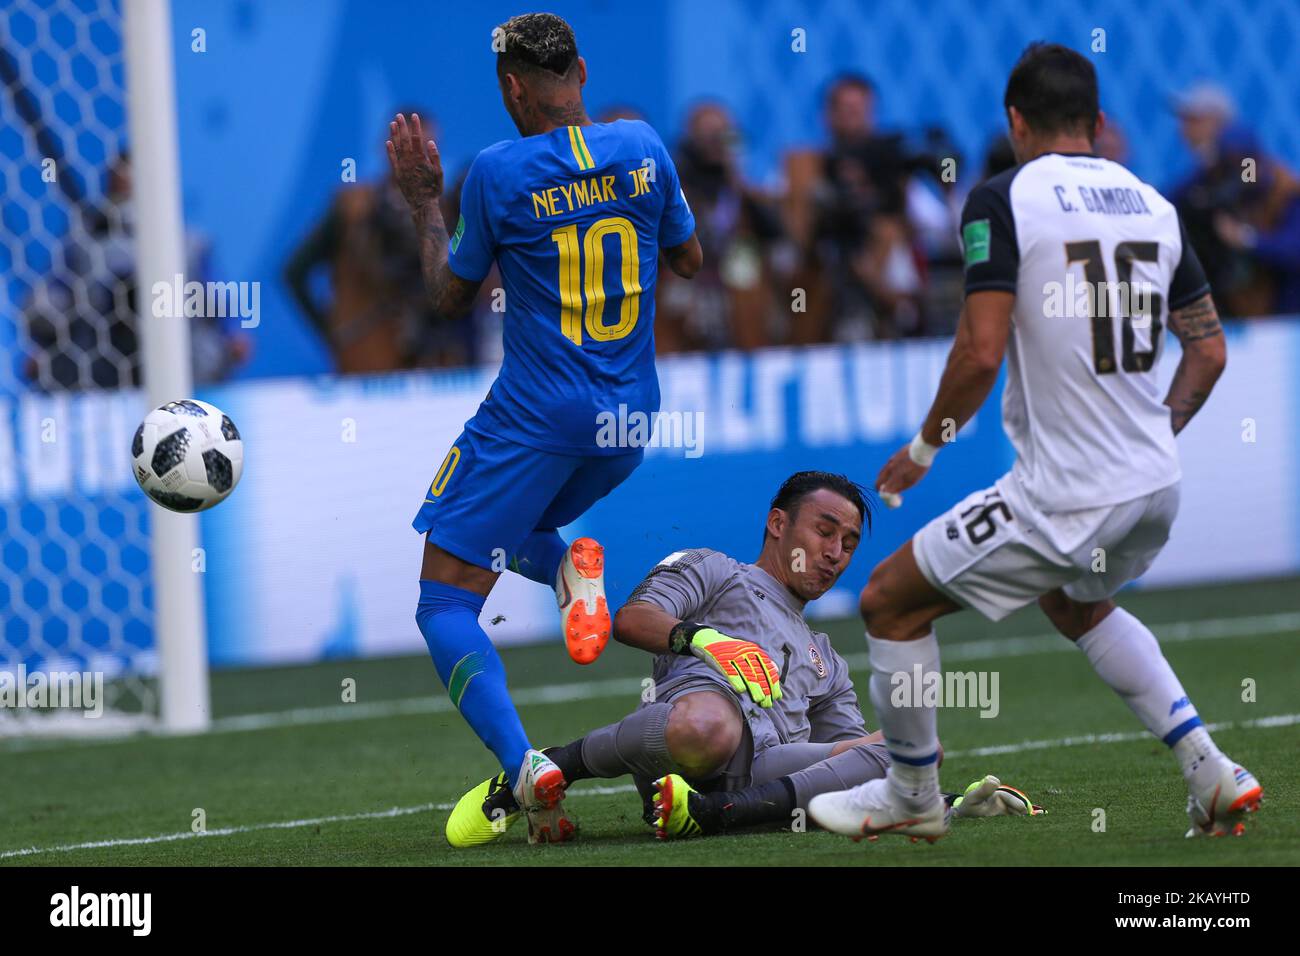 Neymar (L) of the Brazil national football team and Keylor Navas (C) of the Costa Rica national football team vie for the ball during the 2018 FIFA World Cup match, first stage - Group E between Brazil and Costa Rica at Saint Petersburg Stadium on June 22, 2018 in St. Petersburg, Russia. (Photo by Igor Russak/NurPhoto) Stock Photo